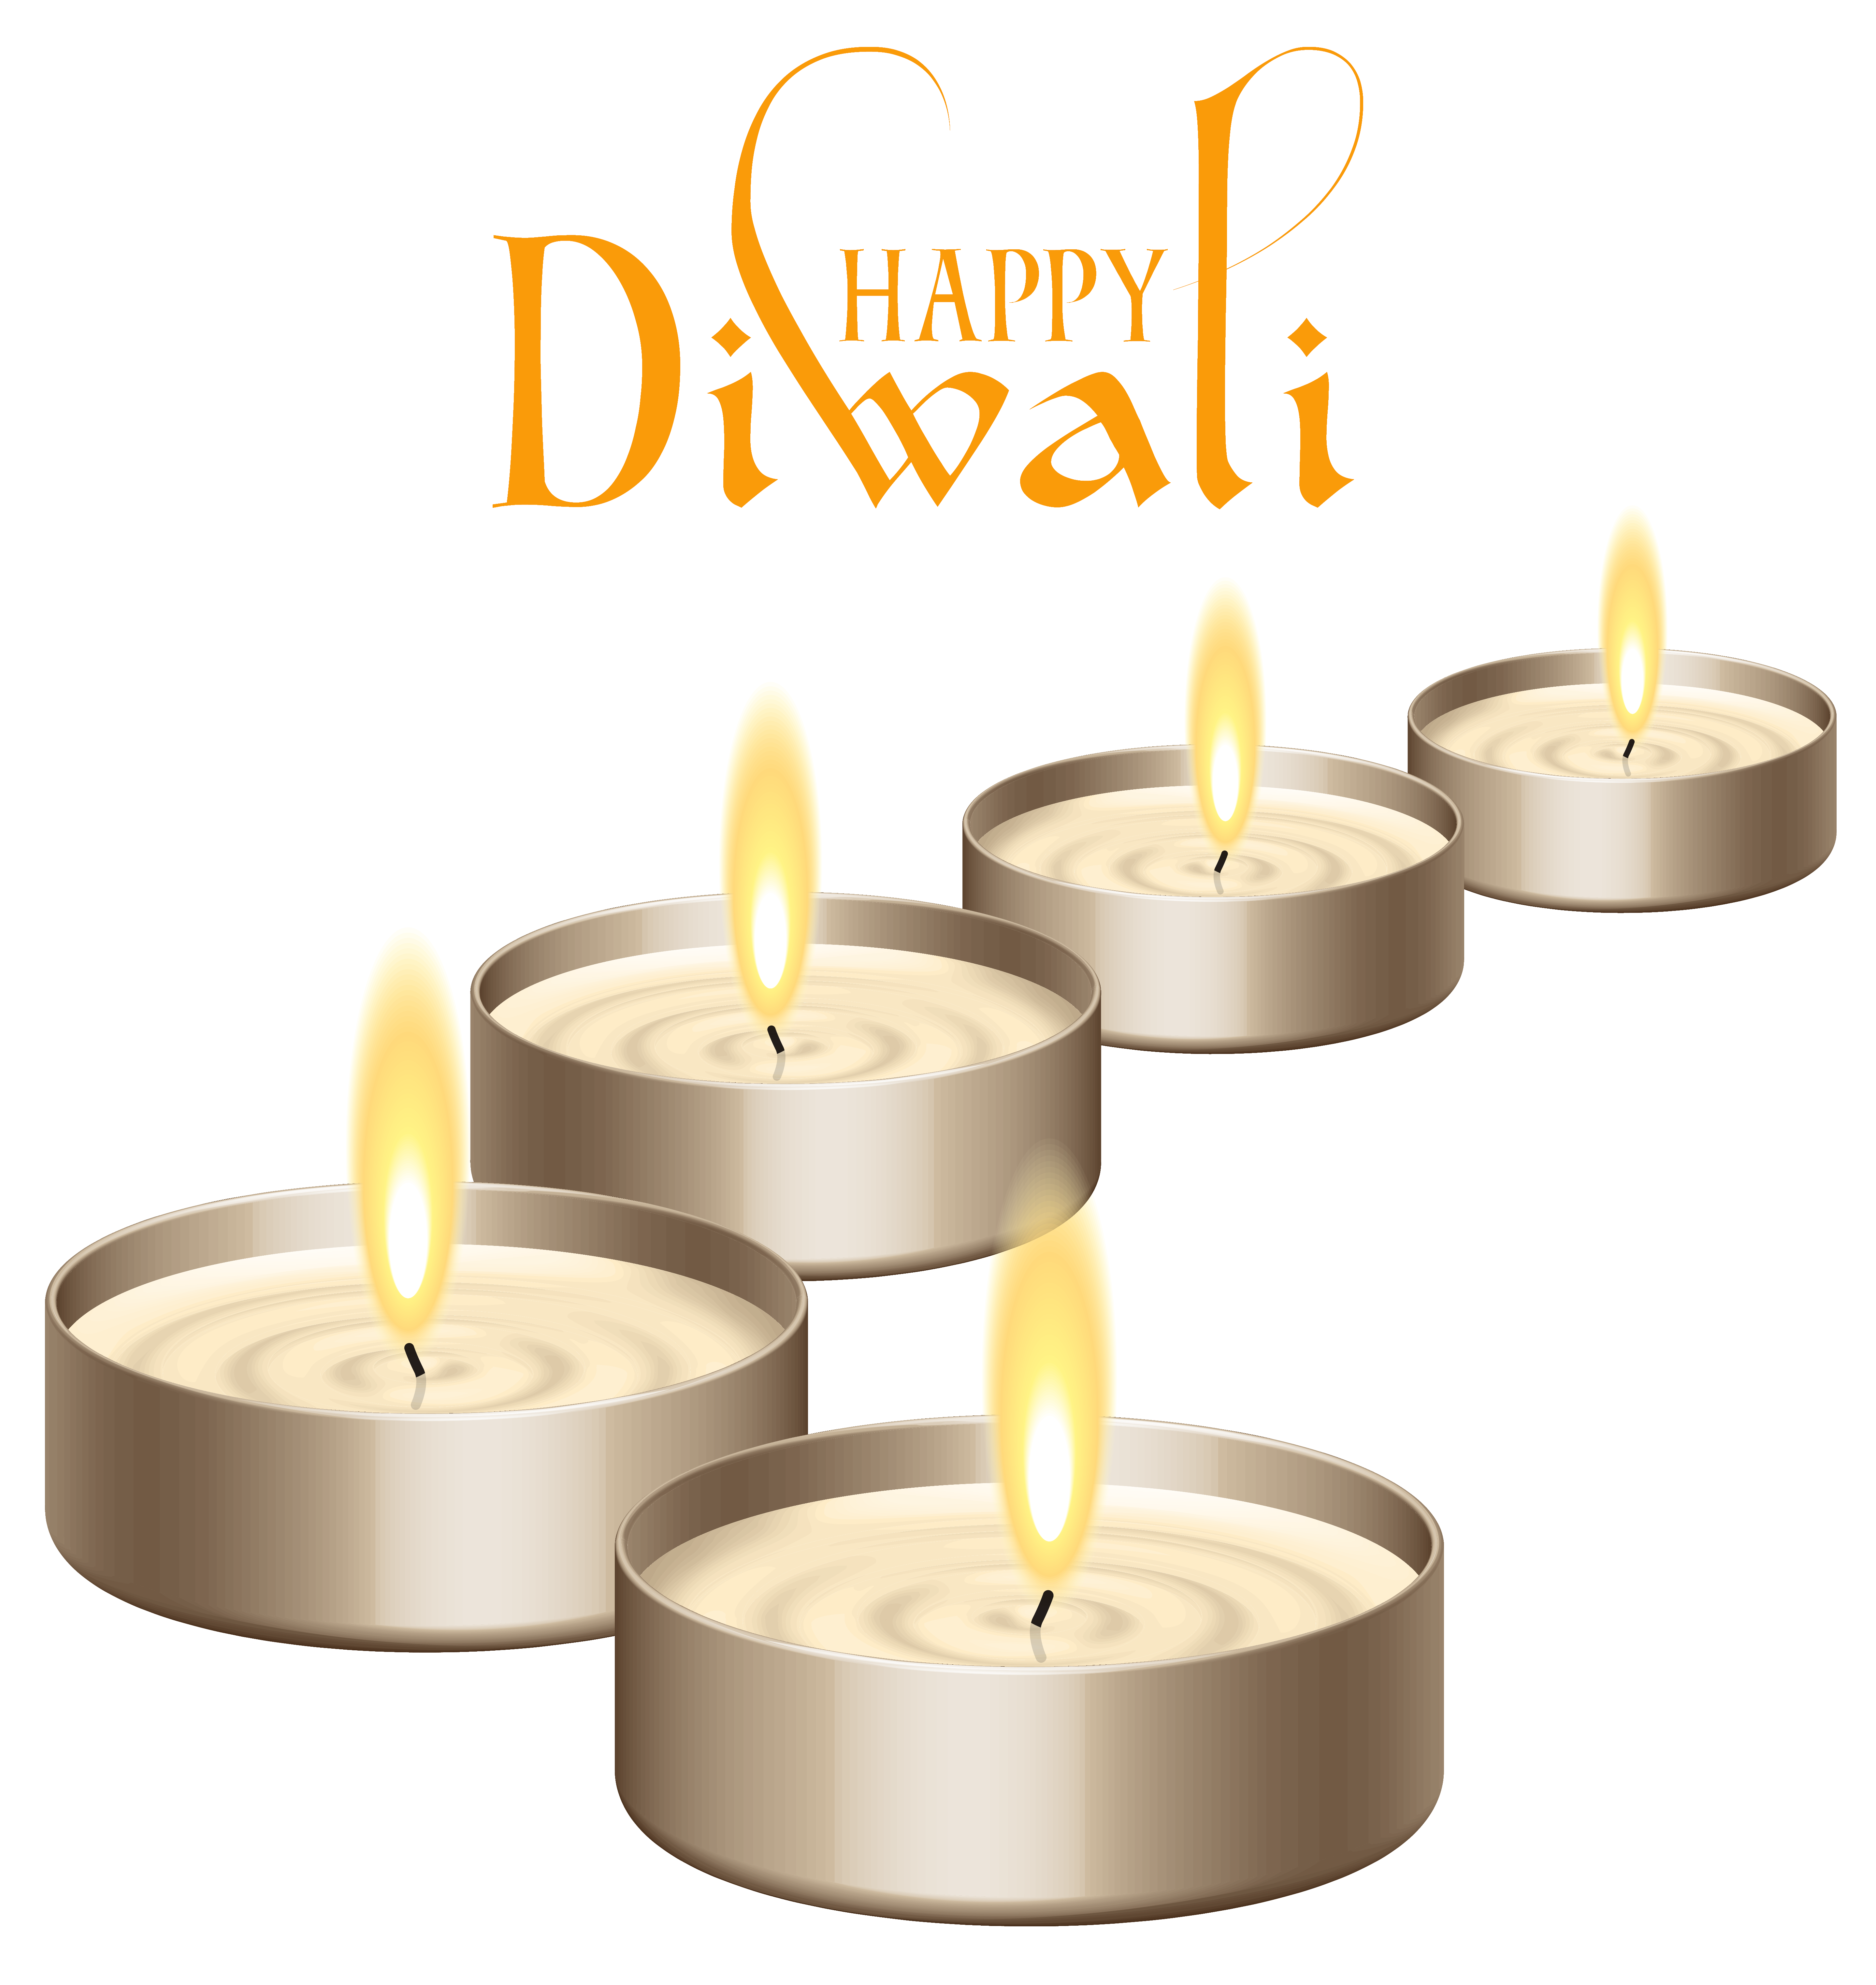 Wish Diwali Sms Candles Message Happiness Happy PNG Image